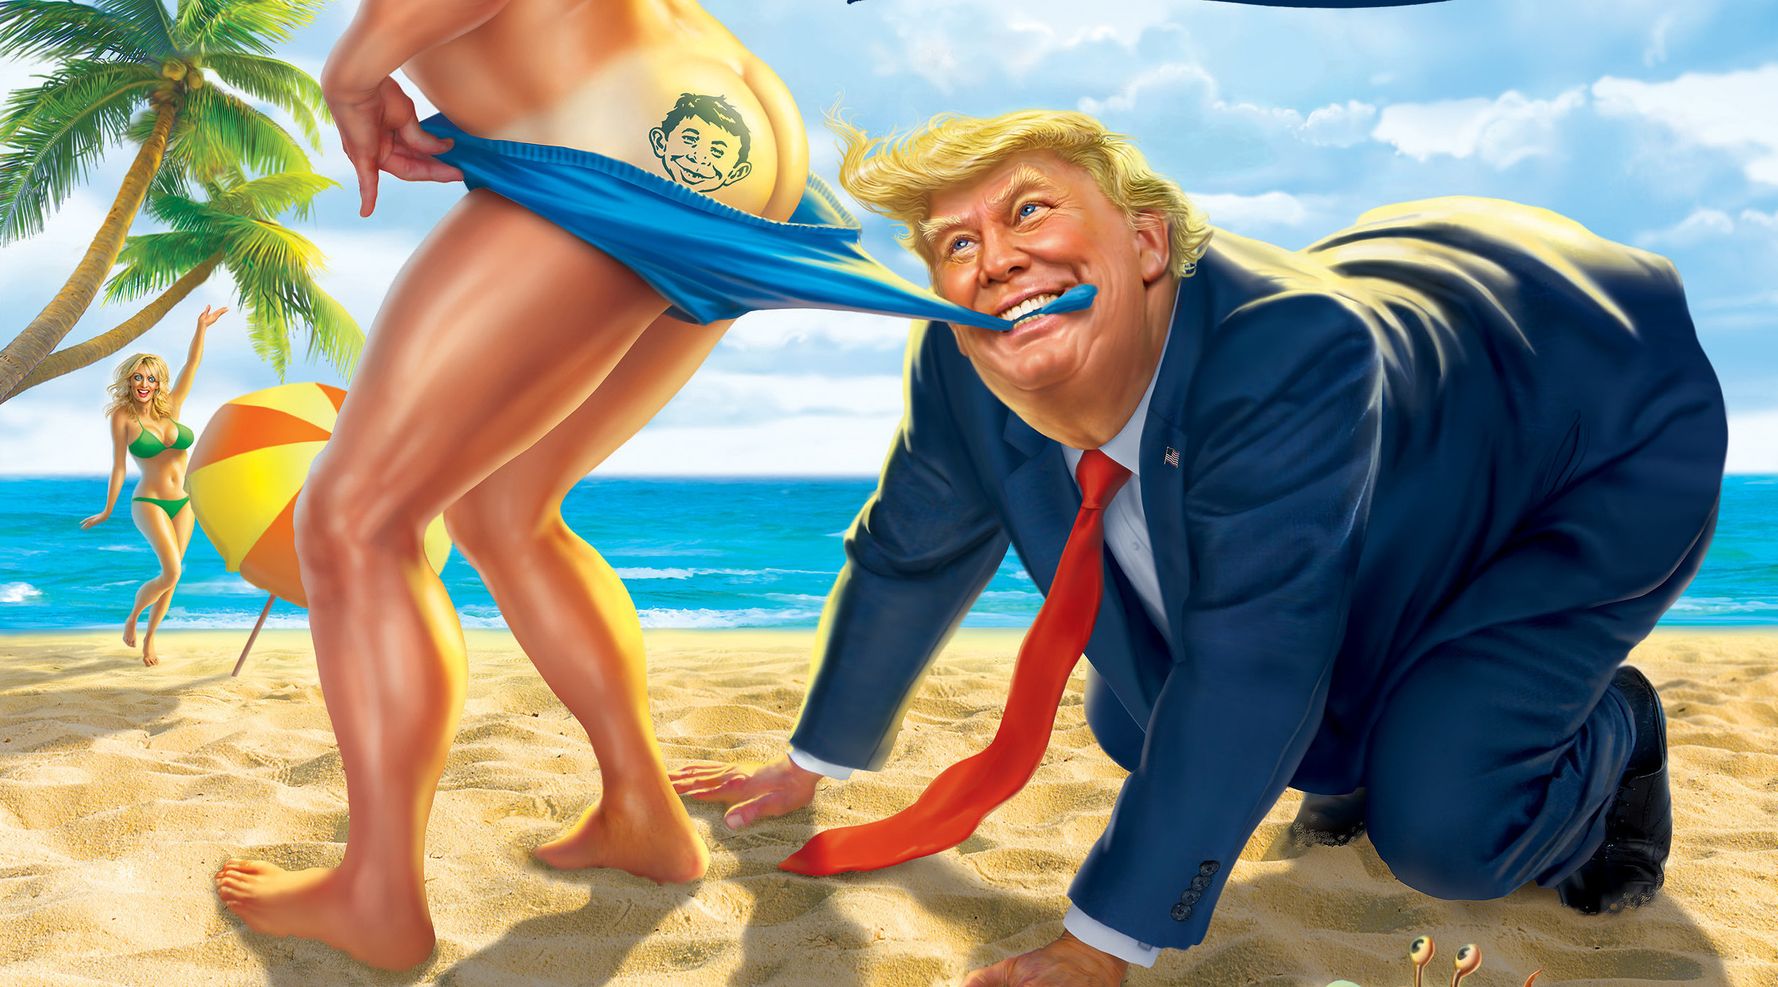 Mad Magazine Goes For Madly Hilarious In New Book Bashing Trump Era.